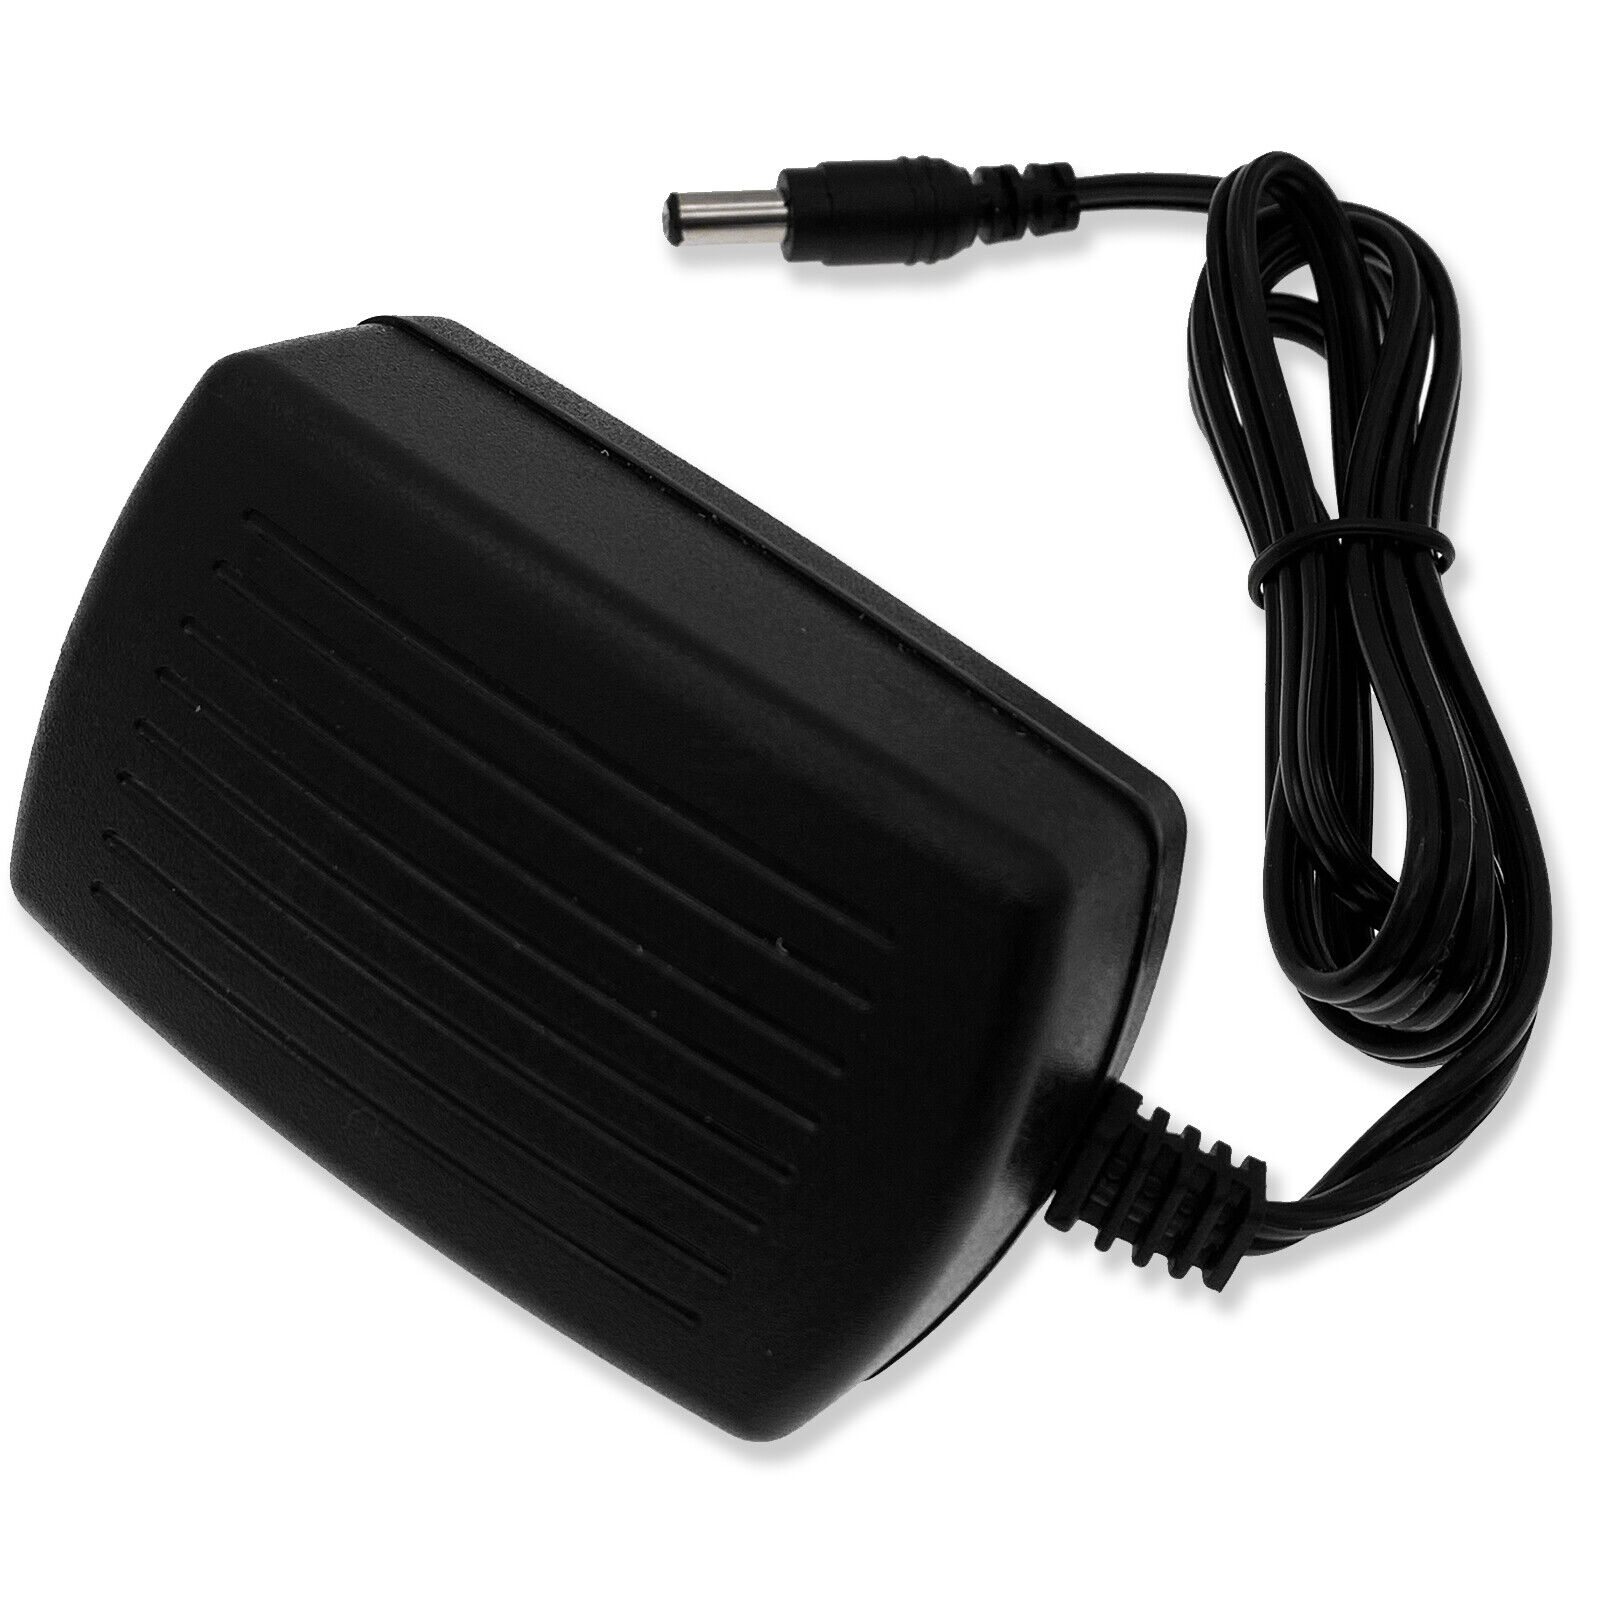 AC Adapter Charger Power for Omron HEM-780 HEM-780N2 HEM-780N3 HEM-790IT Mains This product is good for the following M